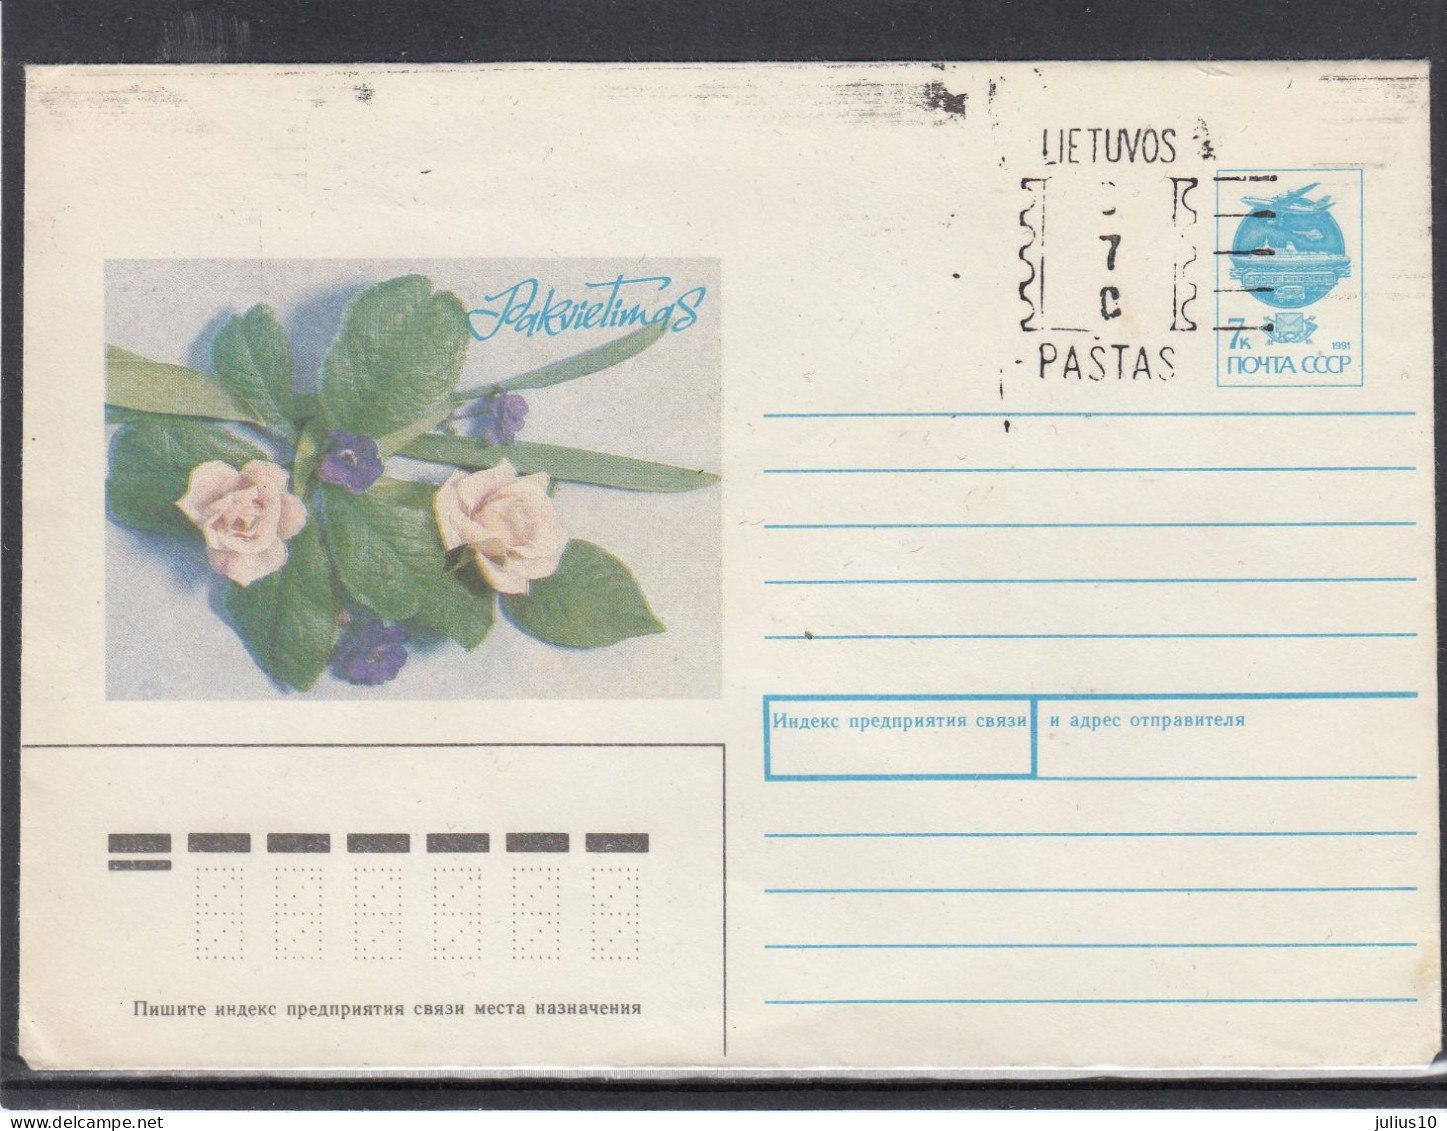 LITHUANIA (USSR) 1990 Cover Greetings Flowers Roses #LTV63 - Lituania